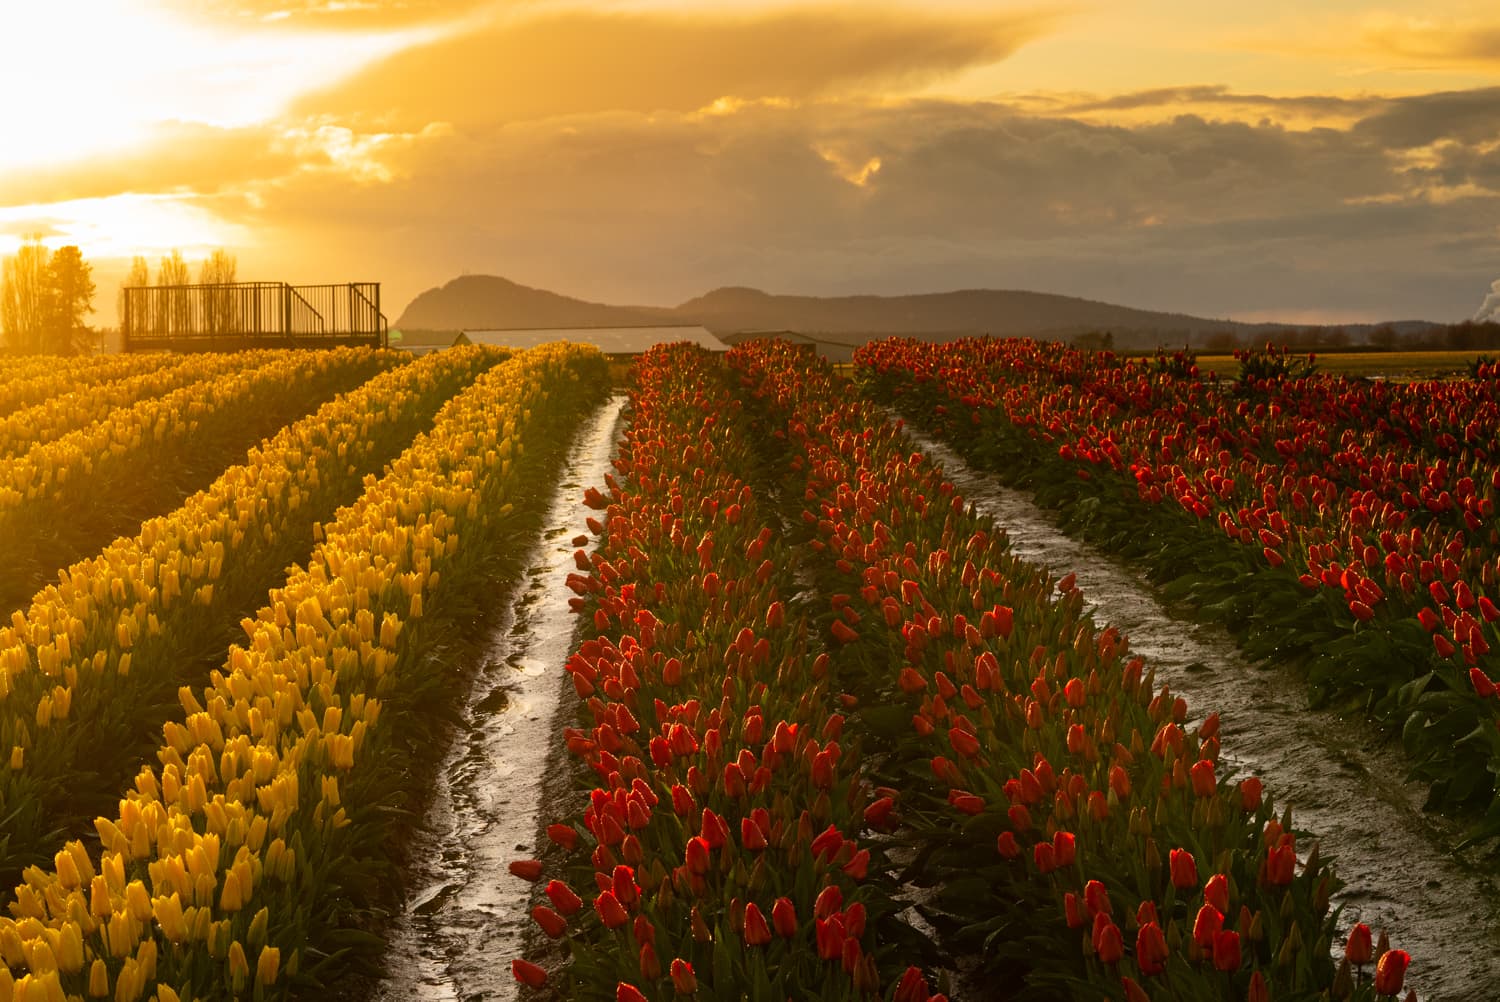 The annual Tulip Festival in Skagit Valley, Washington, has been canceled due to the coronavirus. (Photo courtesy of Tulip Town)